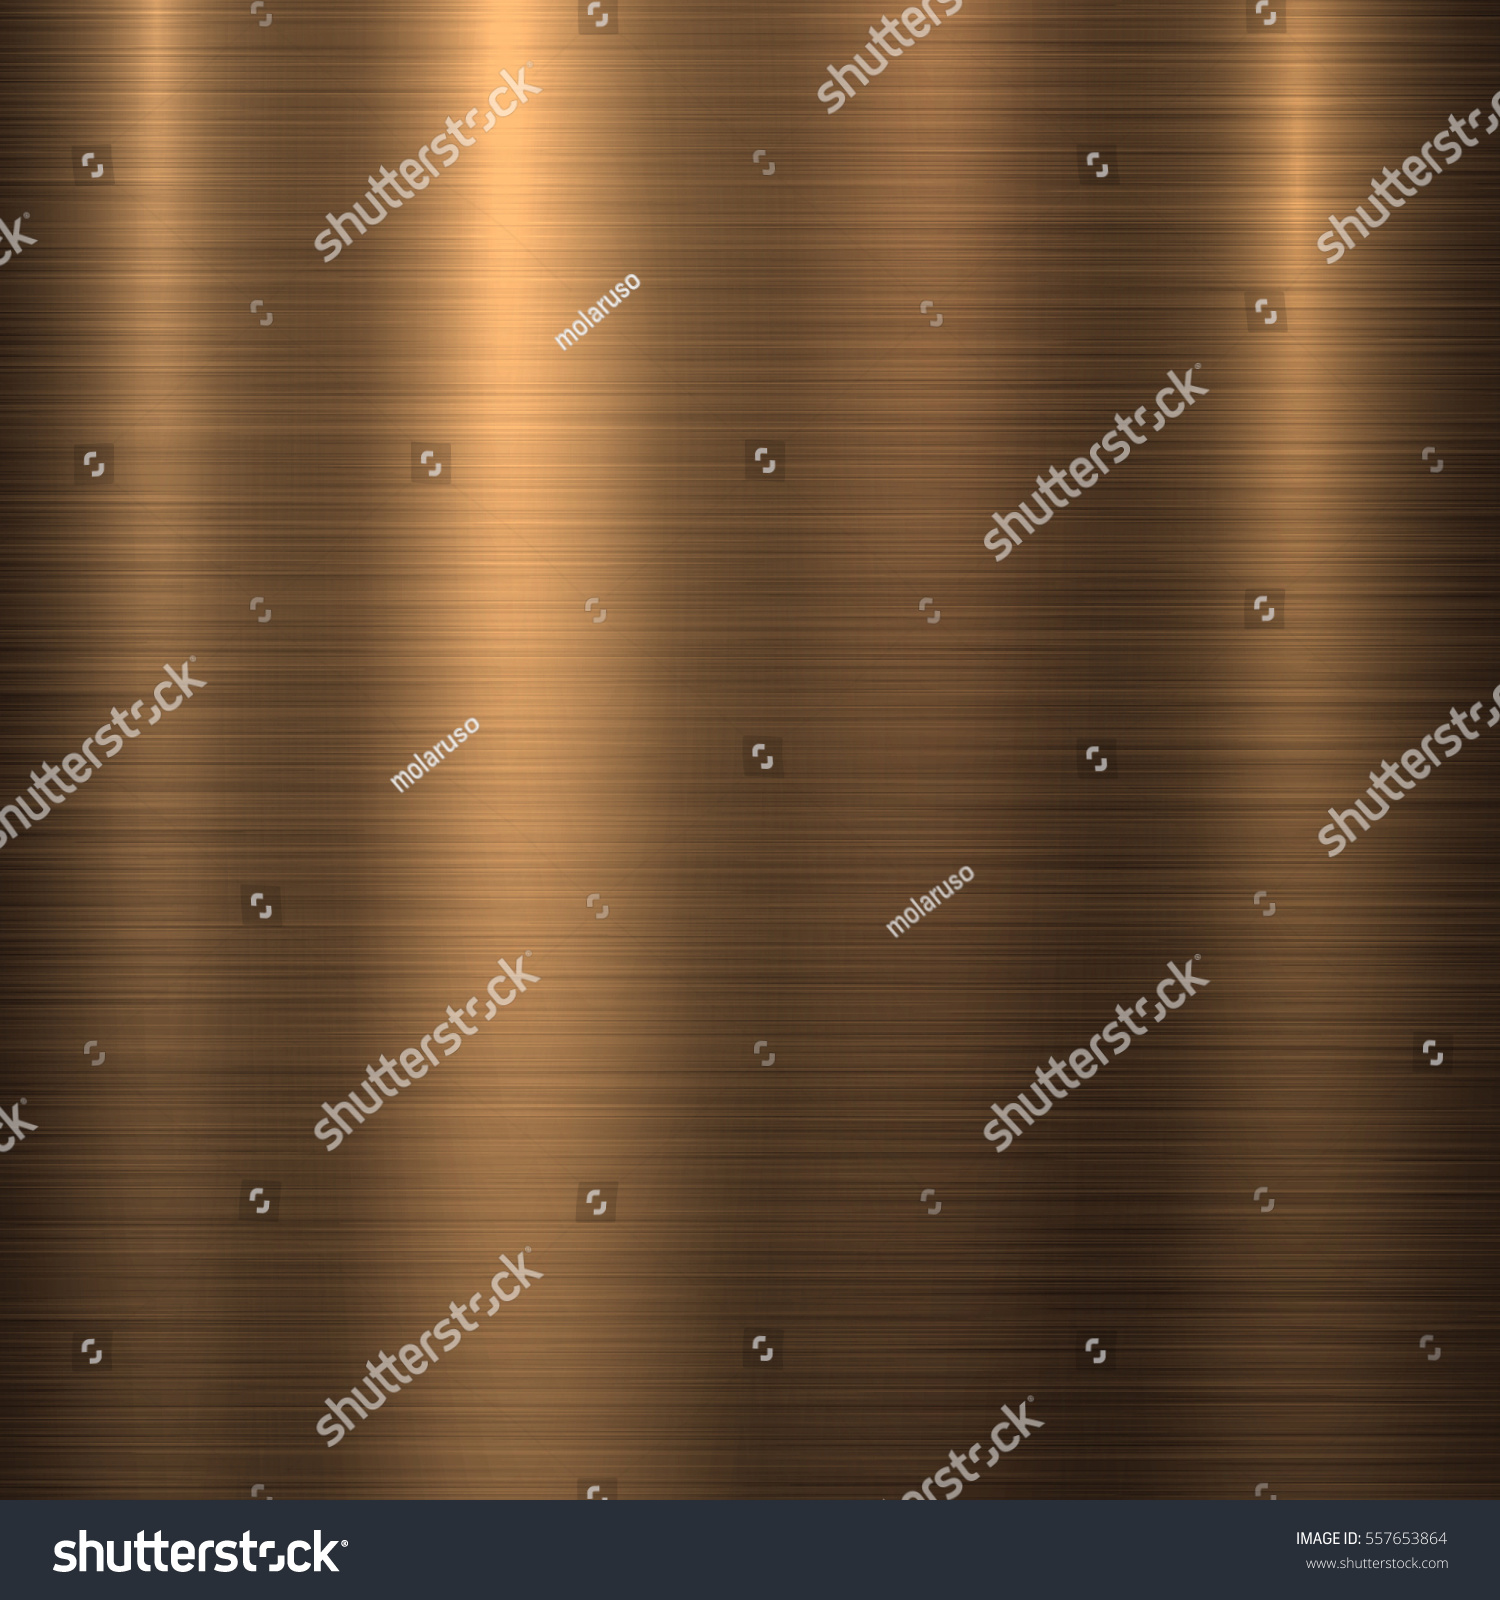 Bronze metal technology background with polished, brushed metal texture, chrome, silver, steel, aluminum, copper for design concepts, web, prints, posters, wallpapers, interfaces. Vector illustration. #557653864